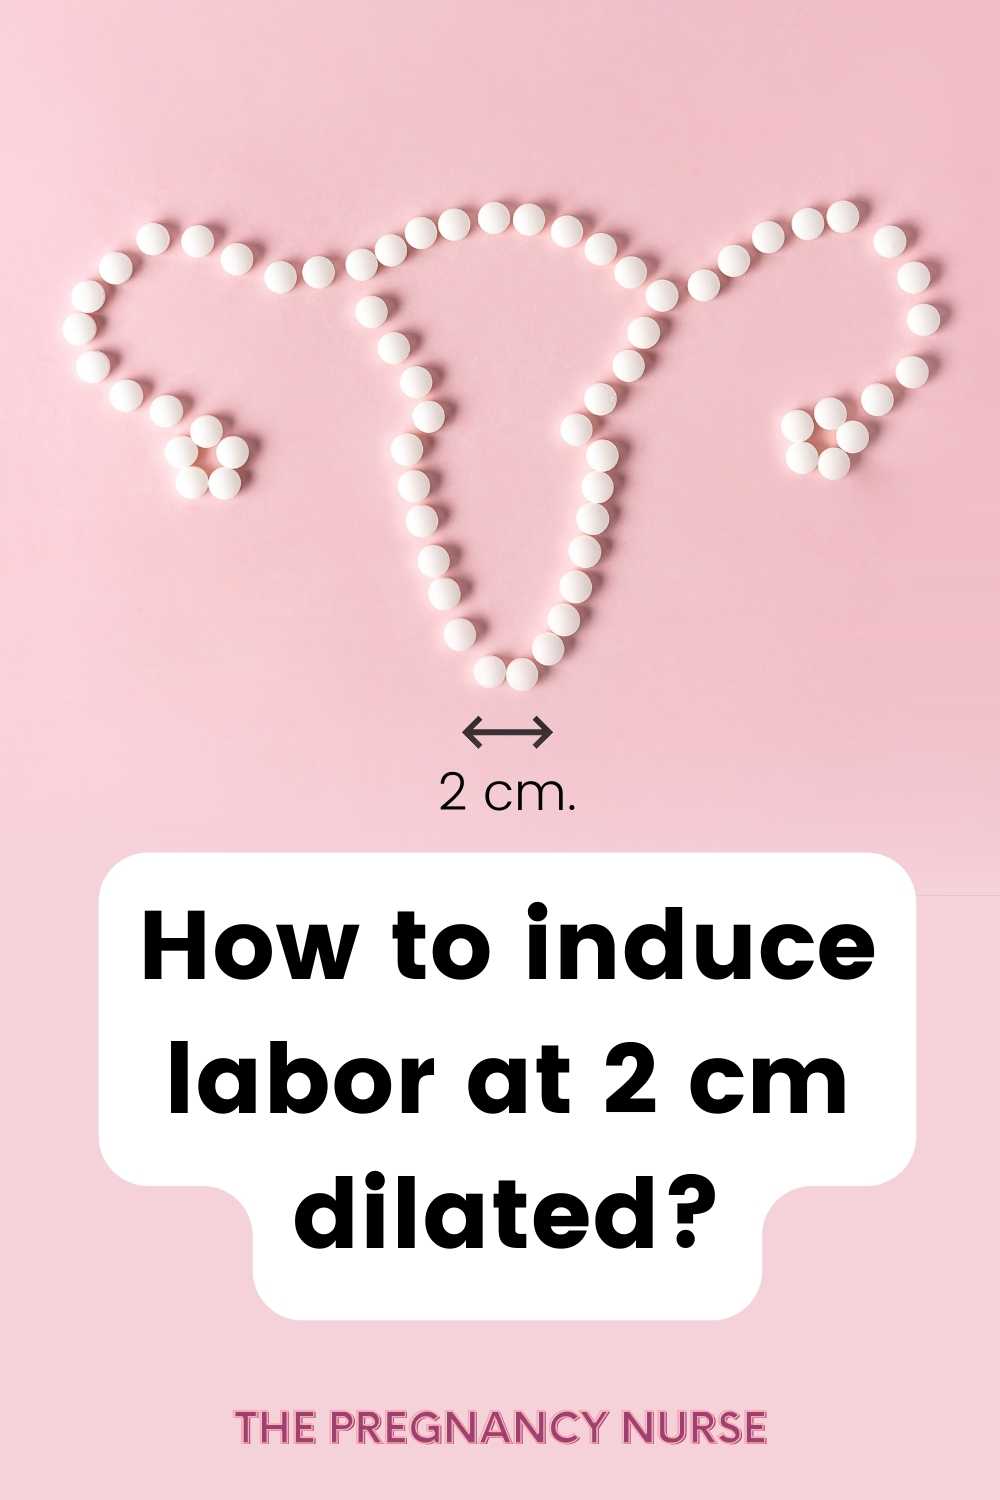 If you're at the point where labor is imminent, here are some methods you can use to help speed things up. Note that these should only be attempted under the guidance of a medical professional.